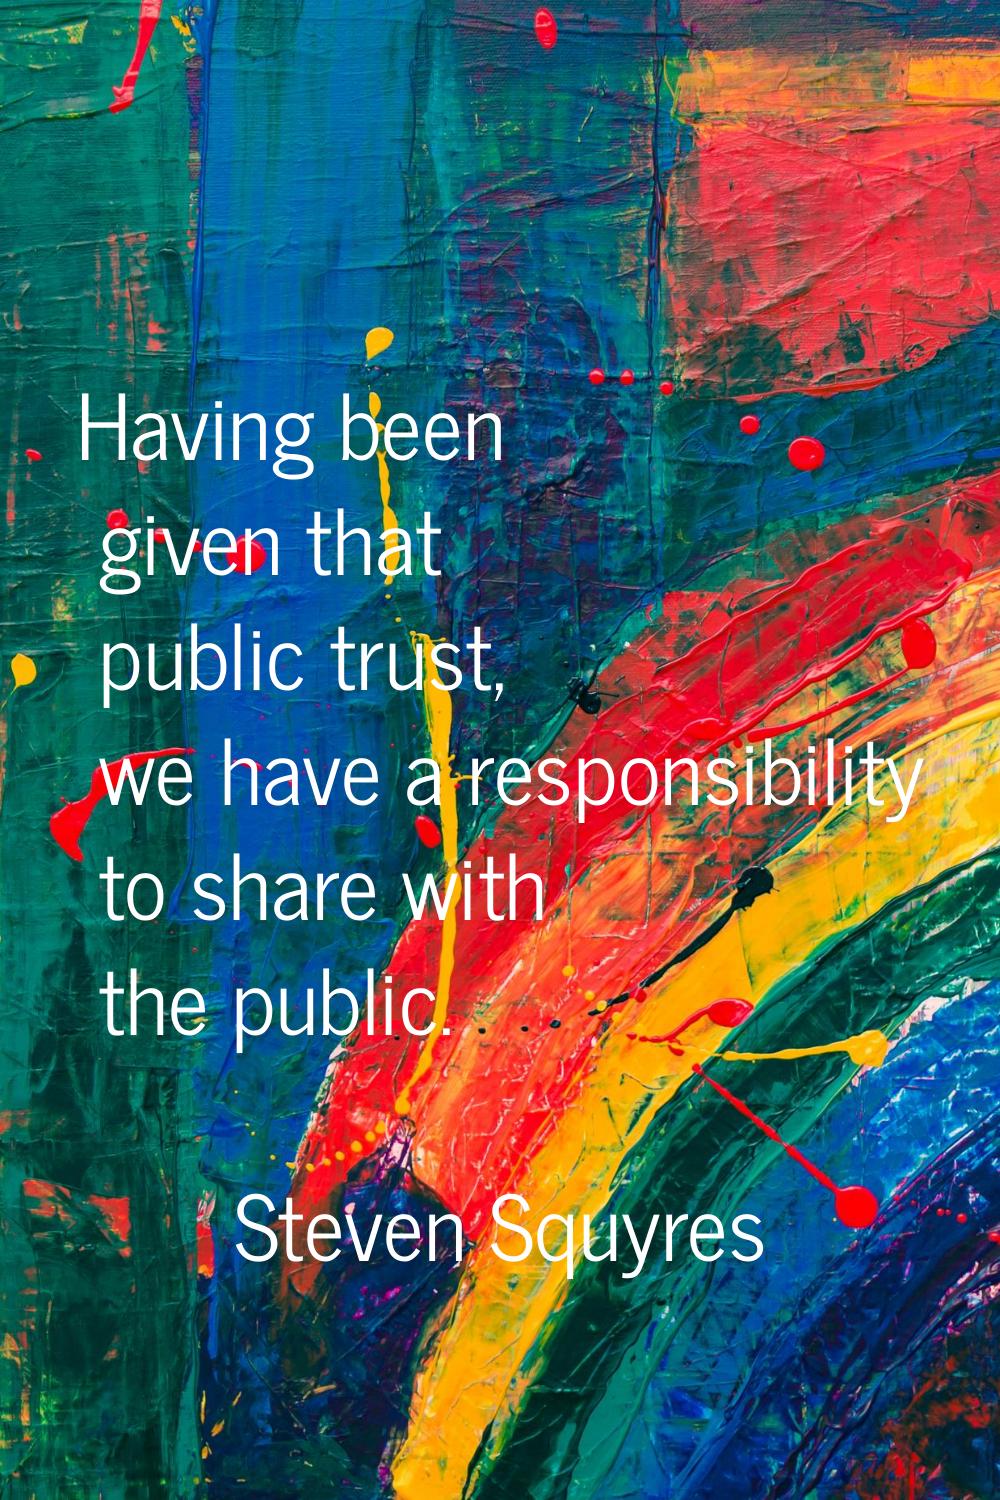 Having been given that public trust, we have a responsibility to share with the public.